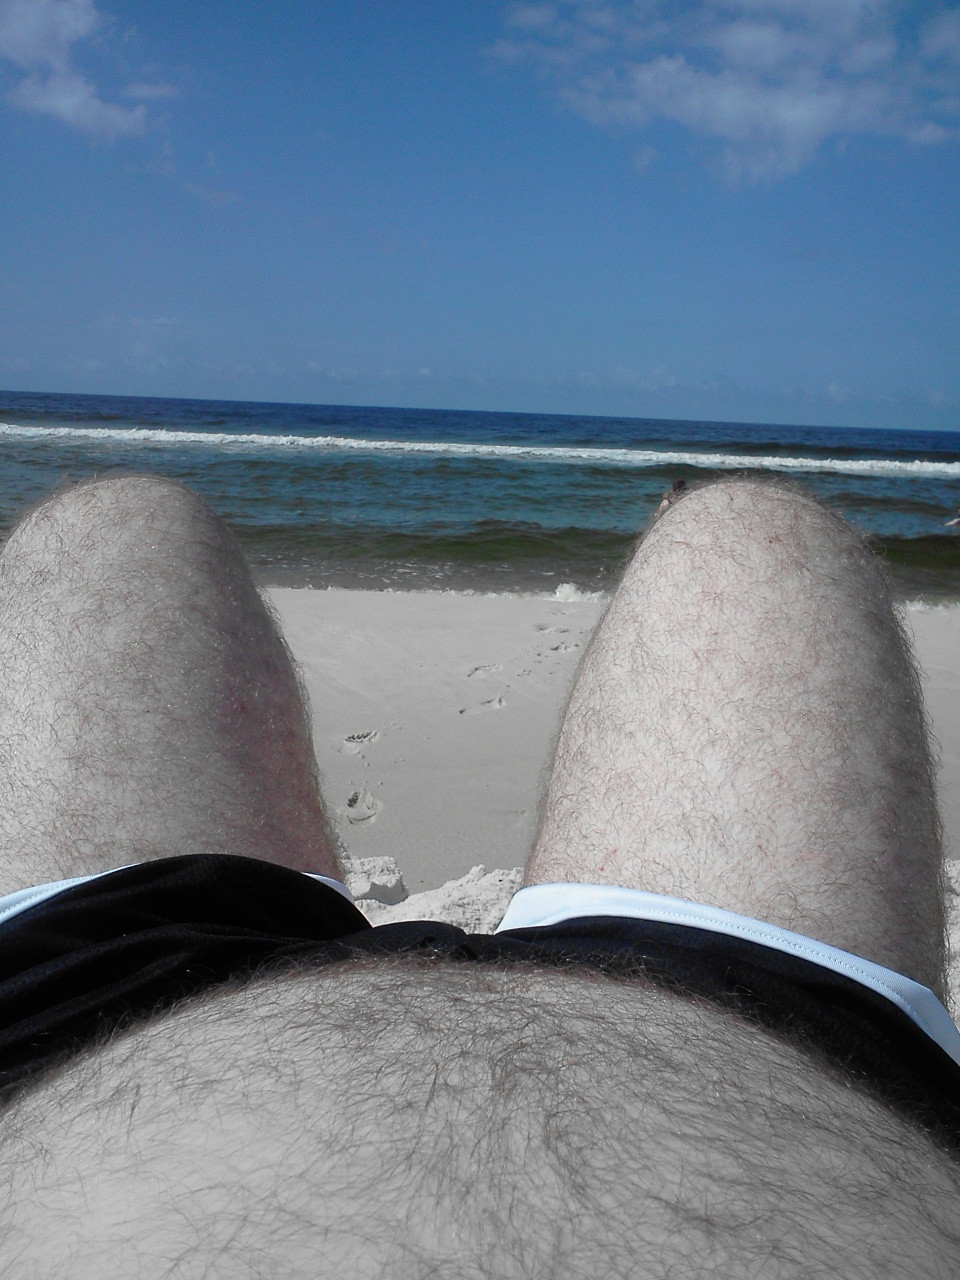 I took a selfie at the beach. Am I doin' it right?